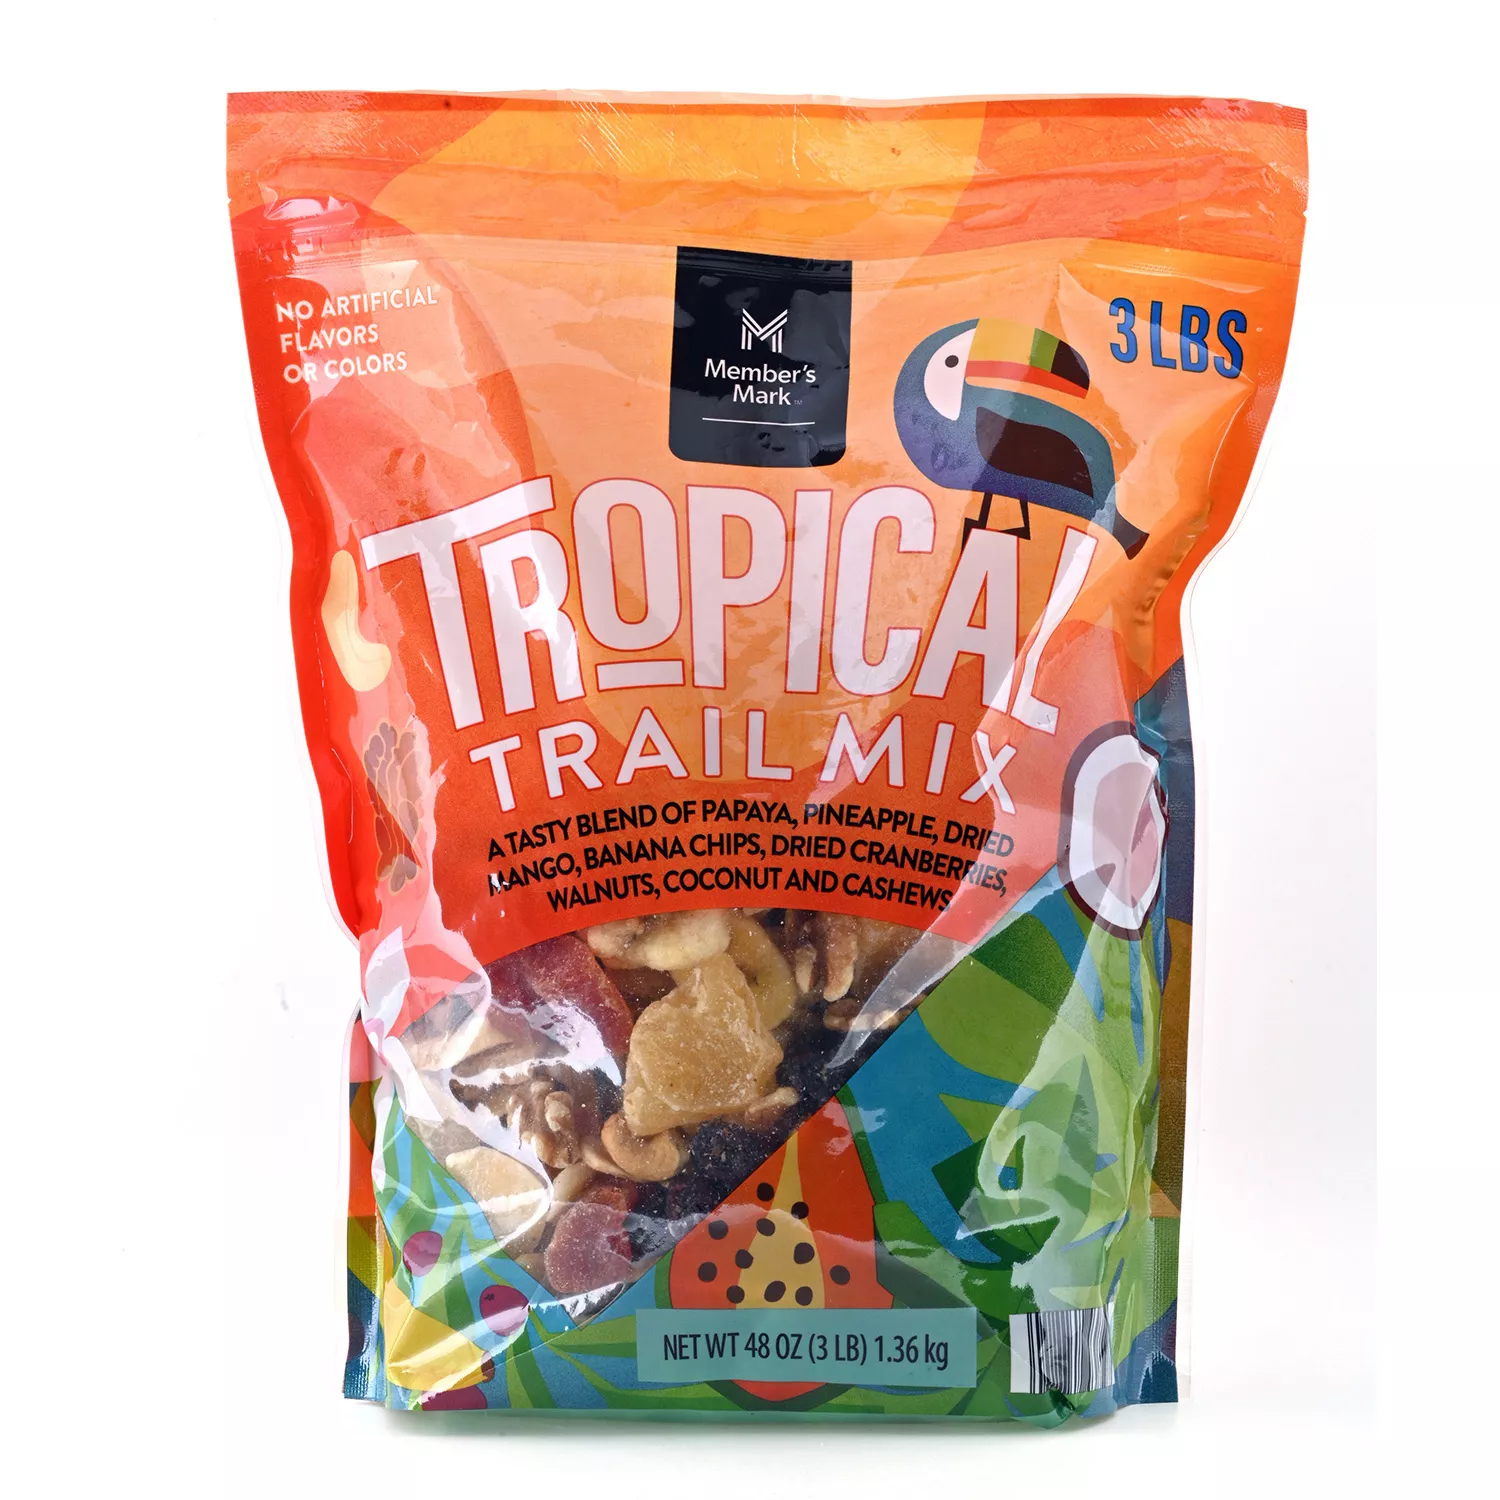 Member's Mark Tropical Trail Mix